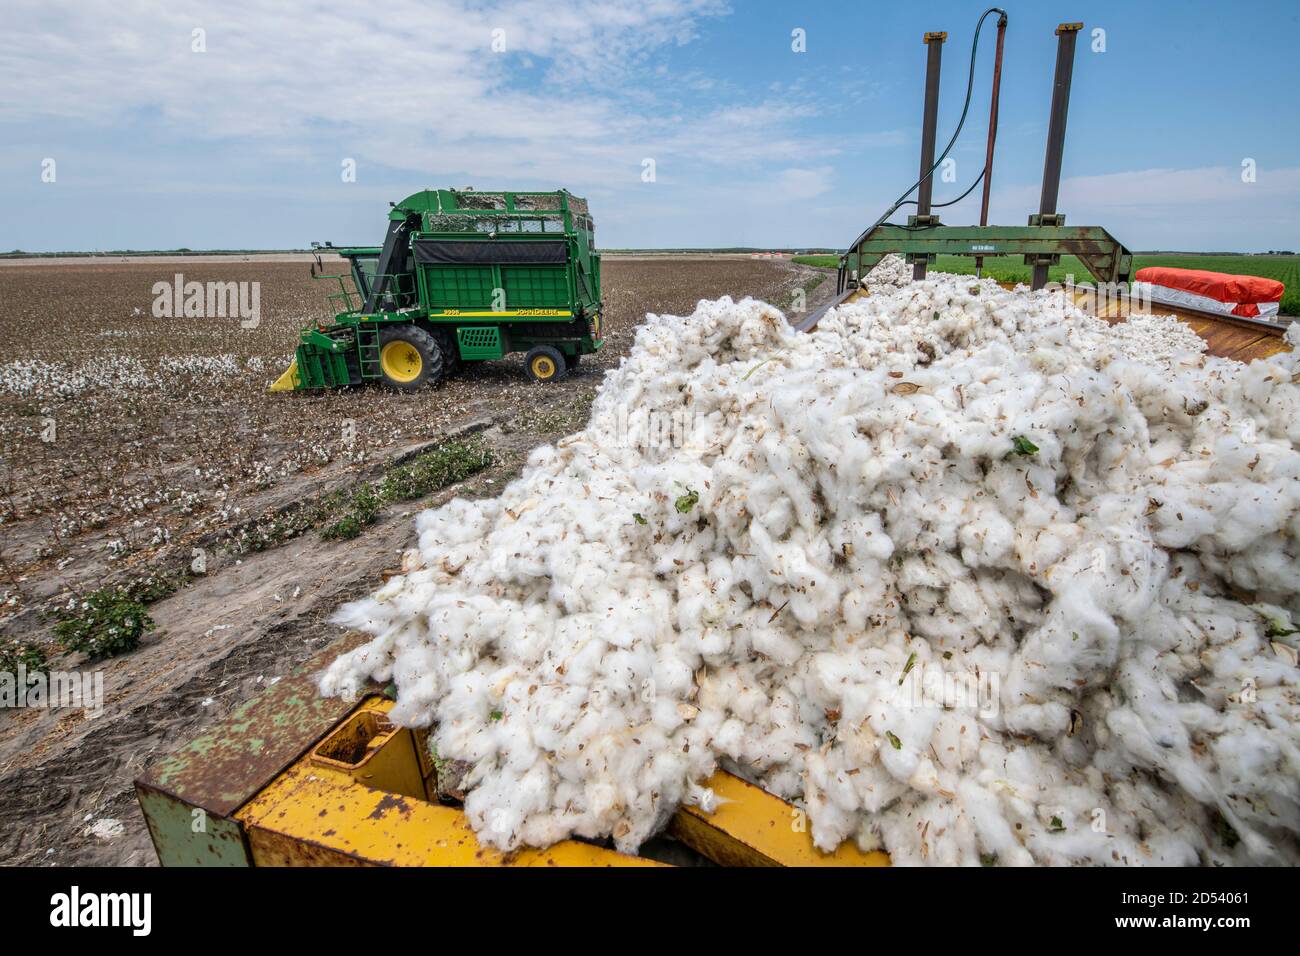 A speciality harvester heads back to the field after unloading cotton bolls into a cotton module builders at his the Schirmer Farm during the cotton harvest August 22, 2020 in Batesville, Texas. Stock Photo